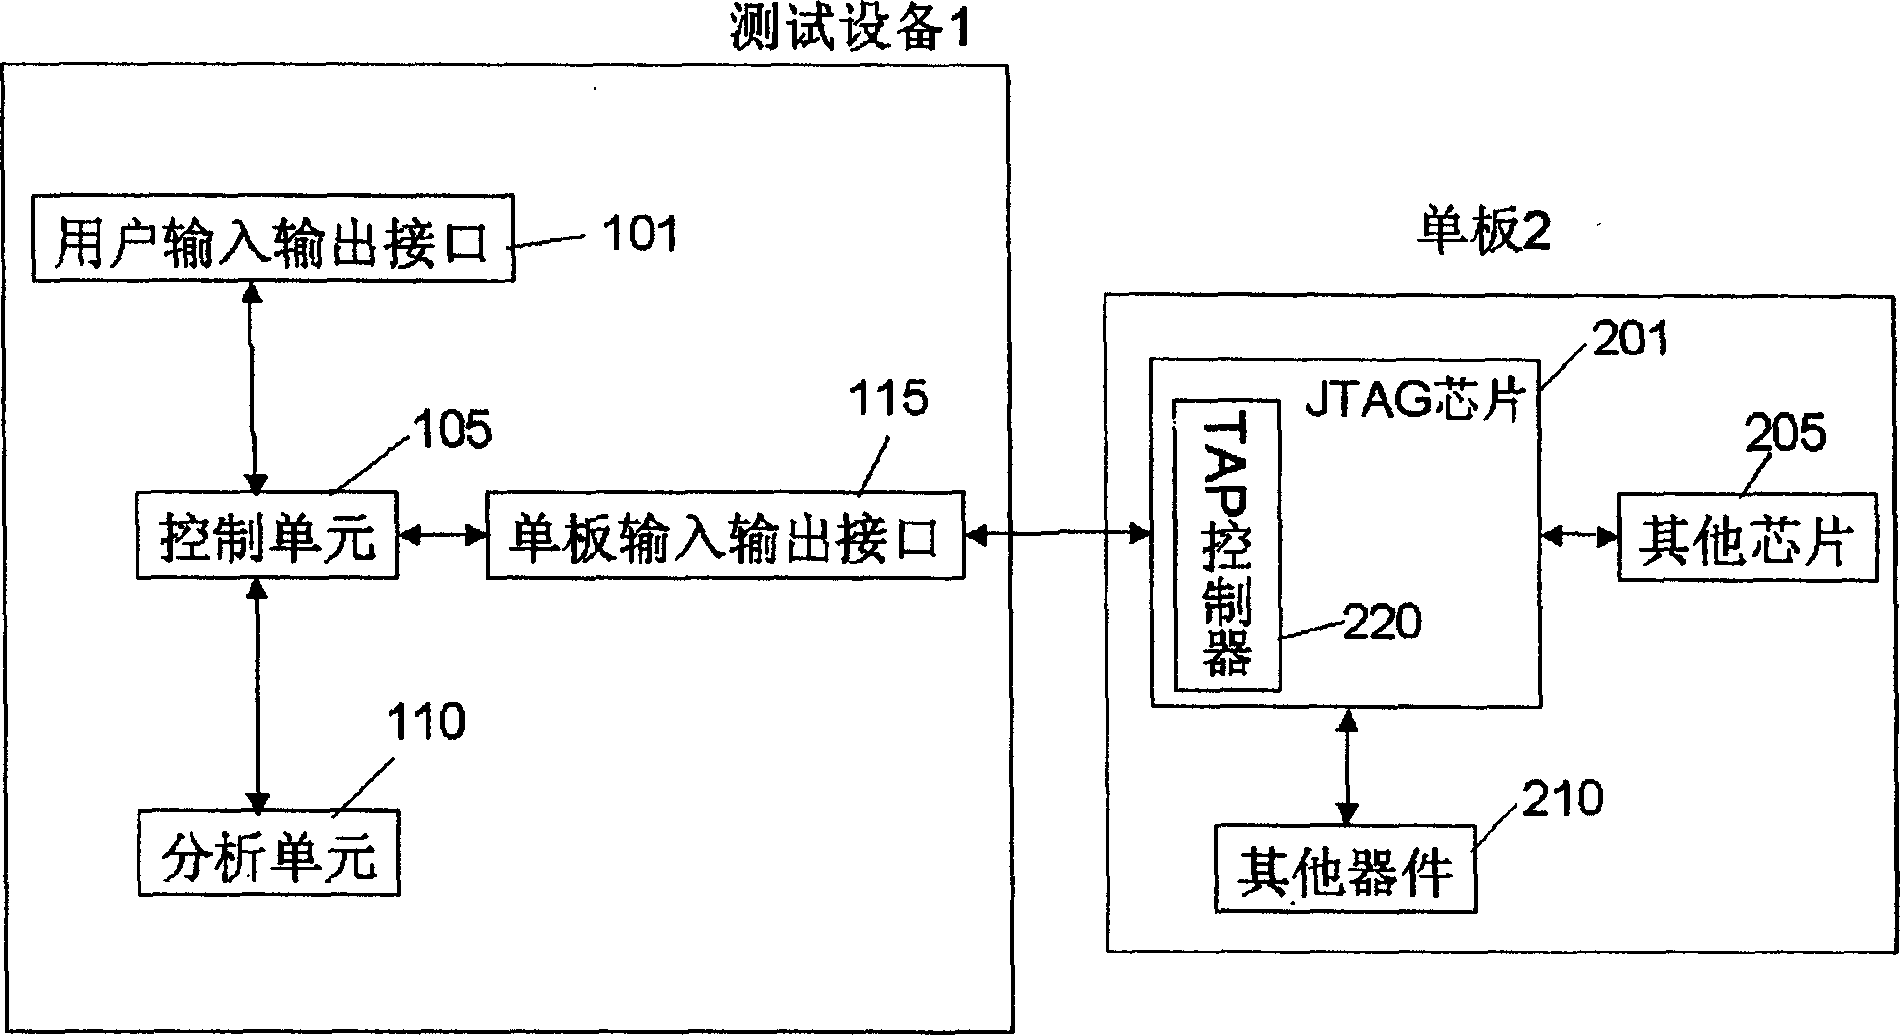 Method and equipment for detecting single plate by JTAG